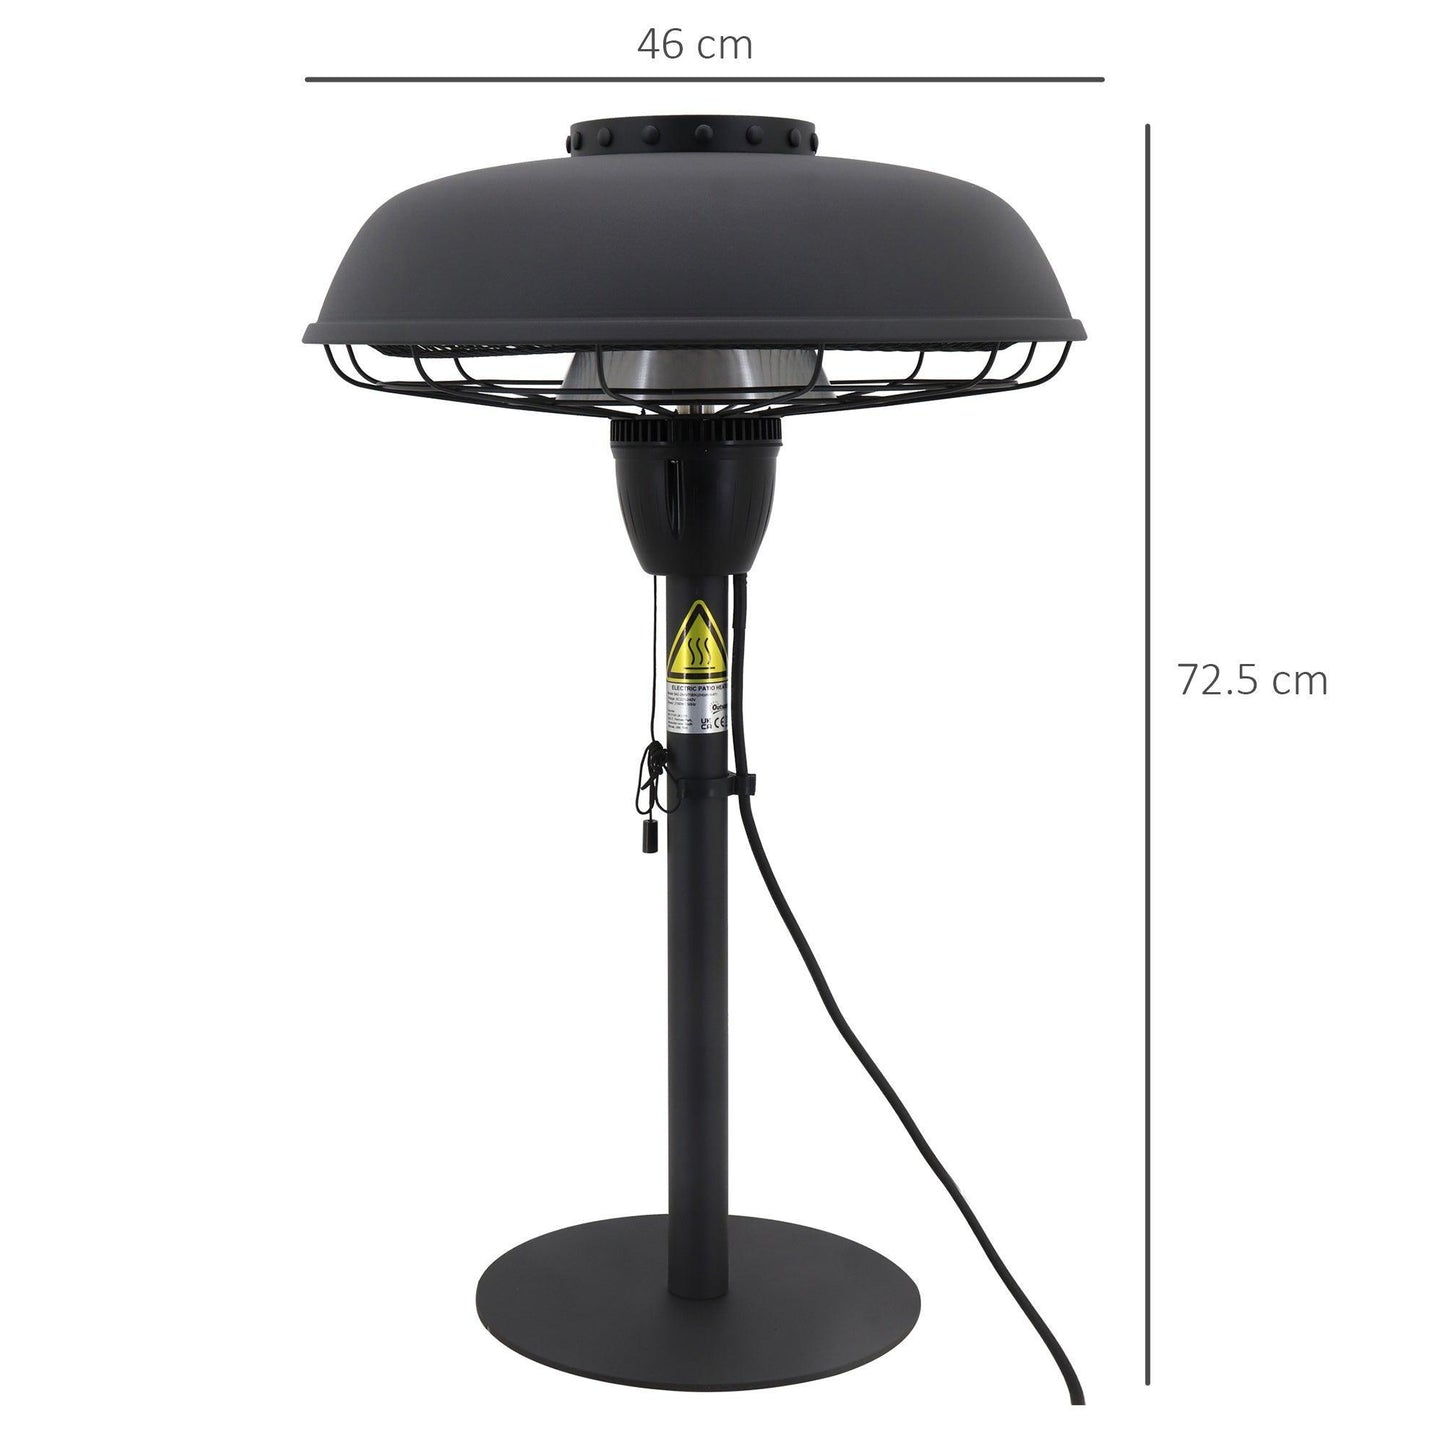 Outsunny Electric Patio Heater - Powerful & Weather Resistant - ALL4U RETAILER LTD